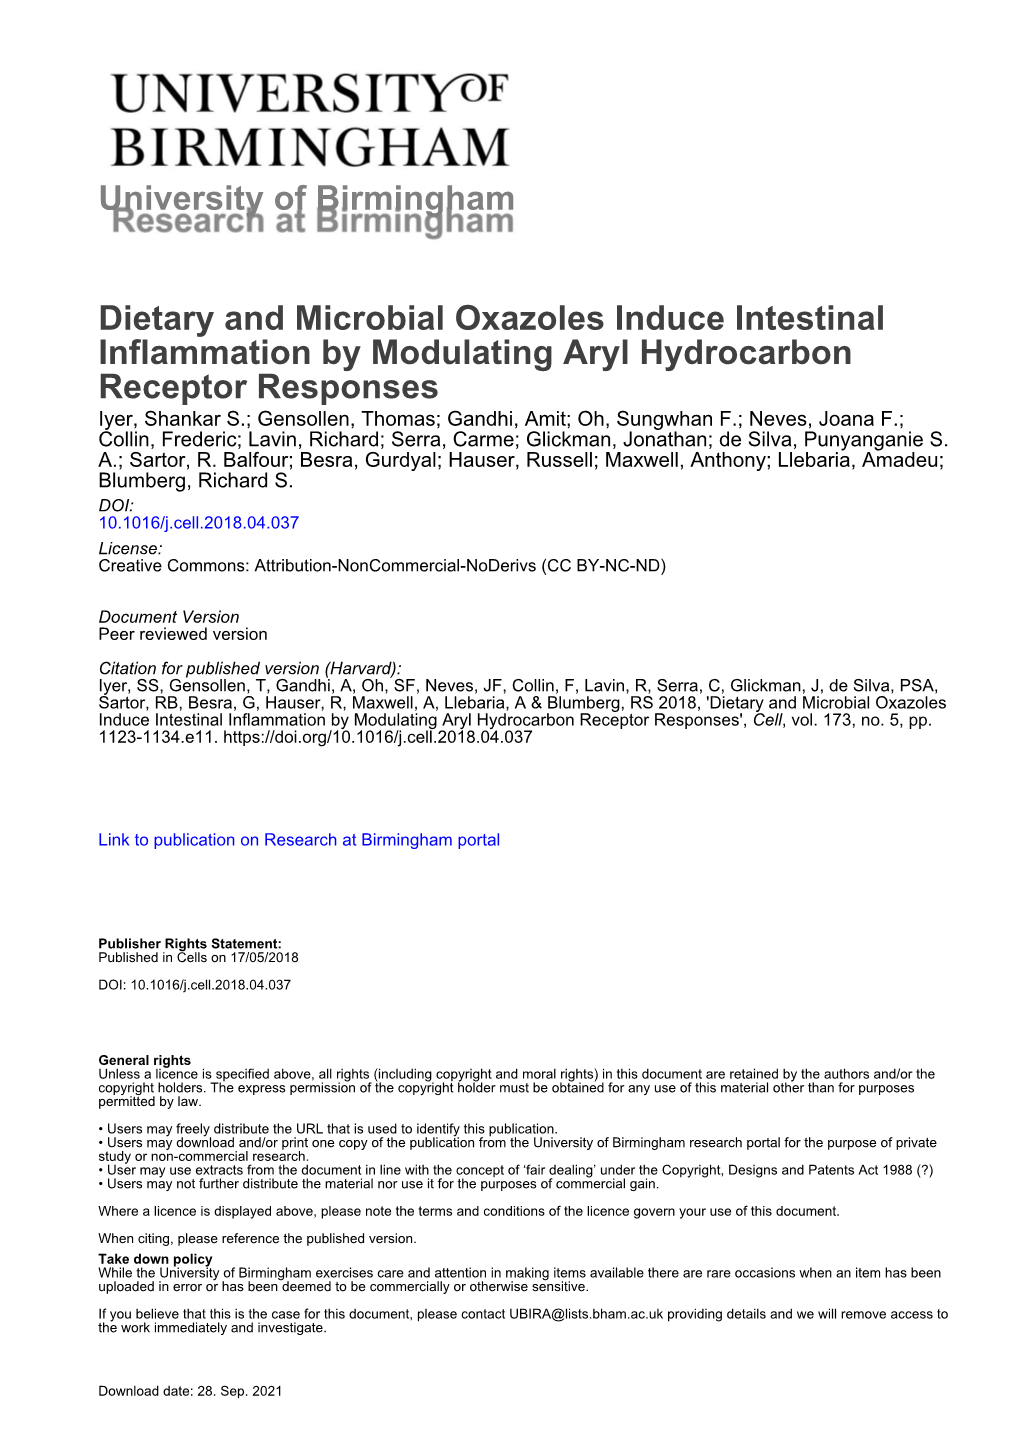 University of Birmingham Dietary and Microbial Oxazoles Induce Intestinal Inflammation by Modulating Aryl Hydrocarbon Receptor R